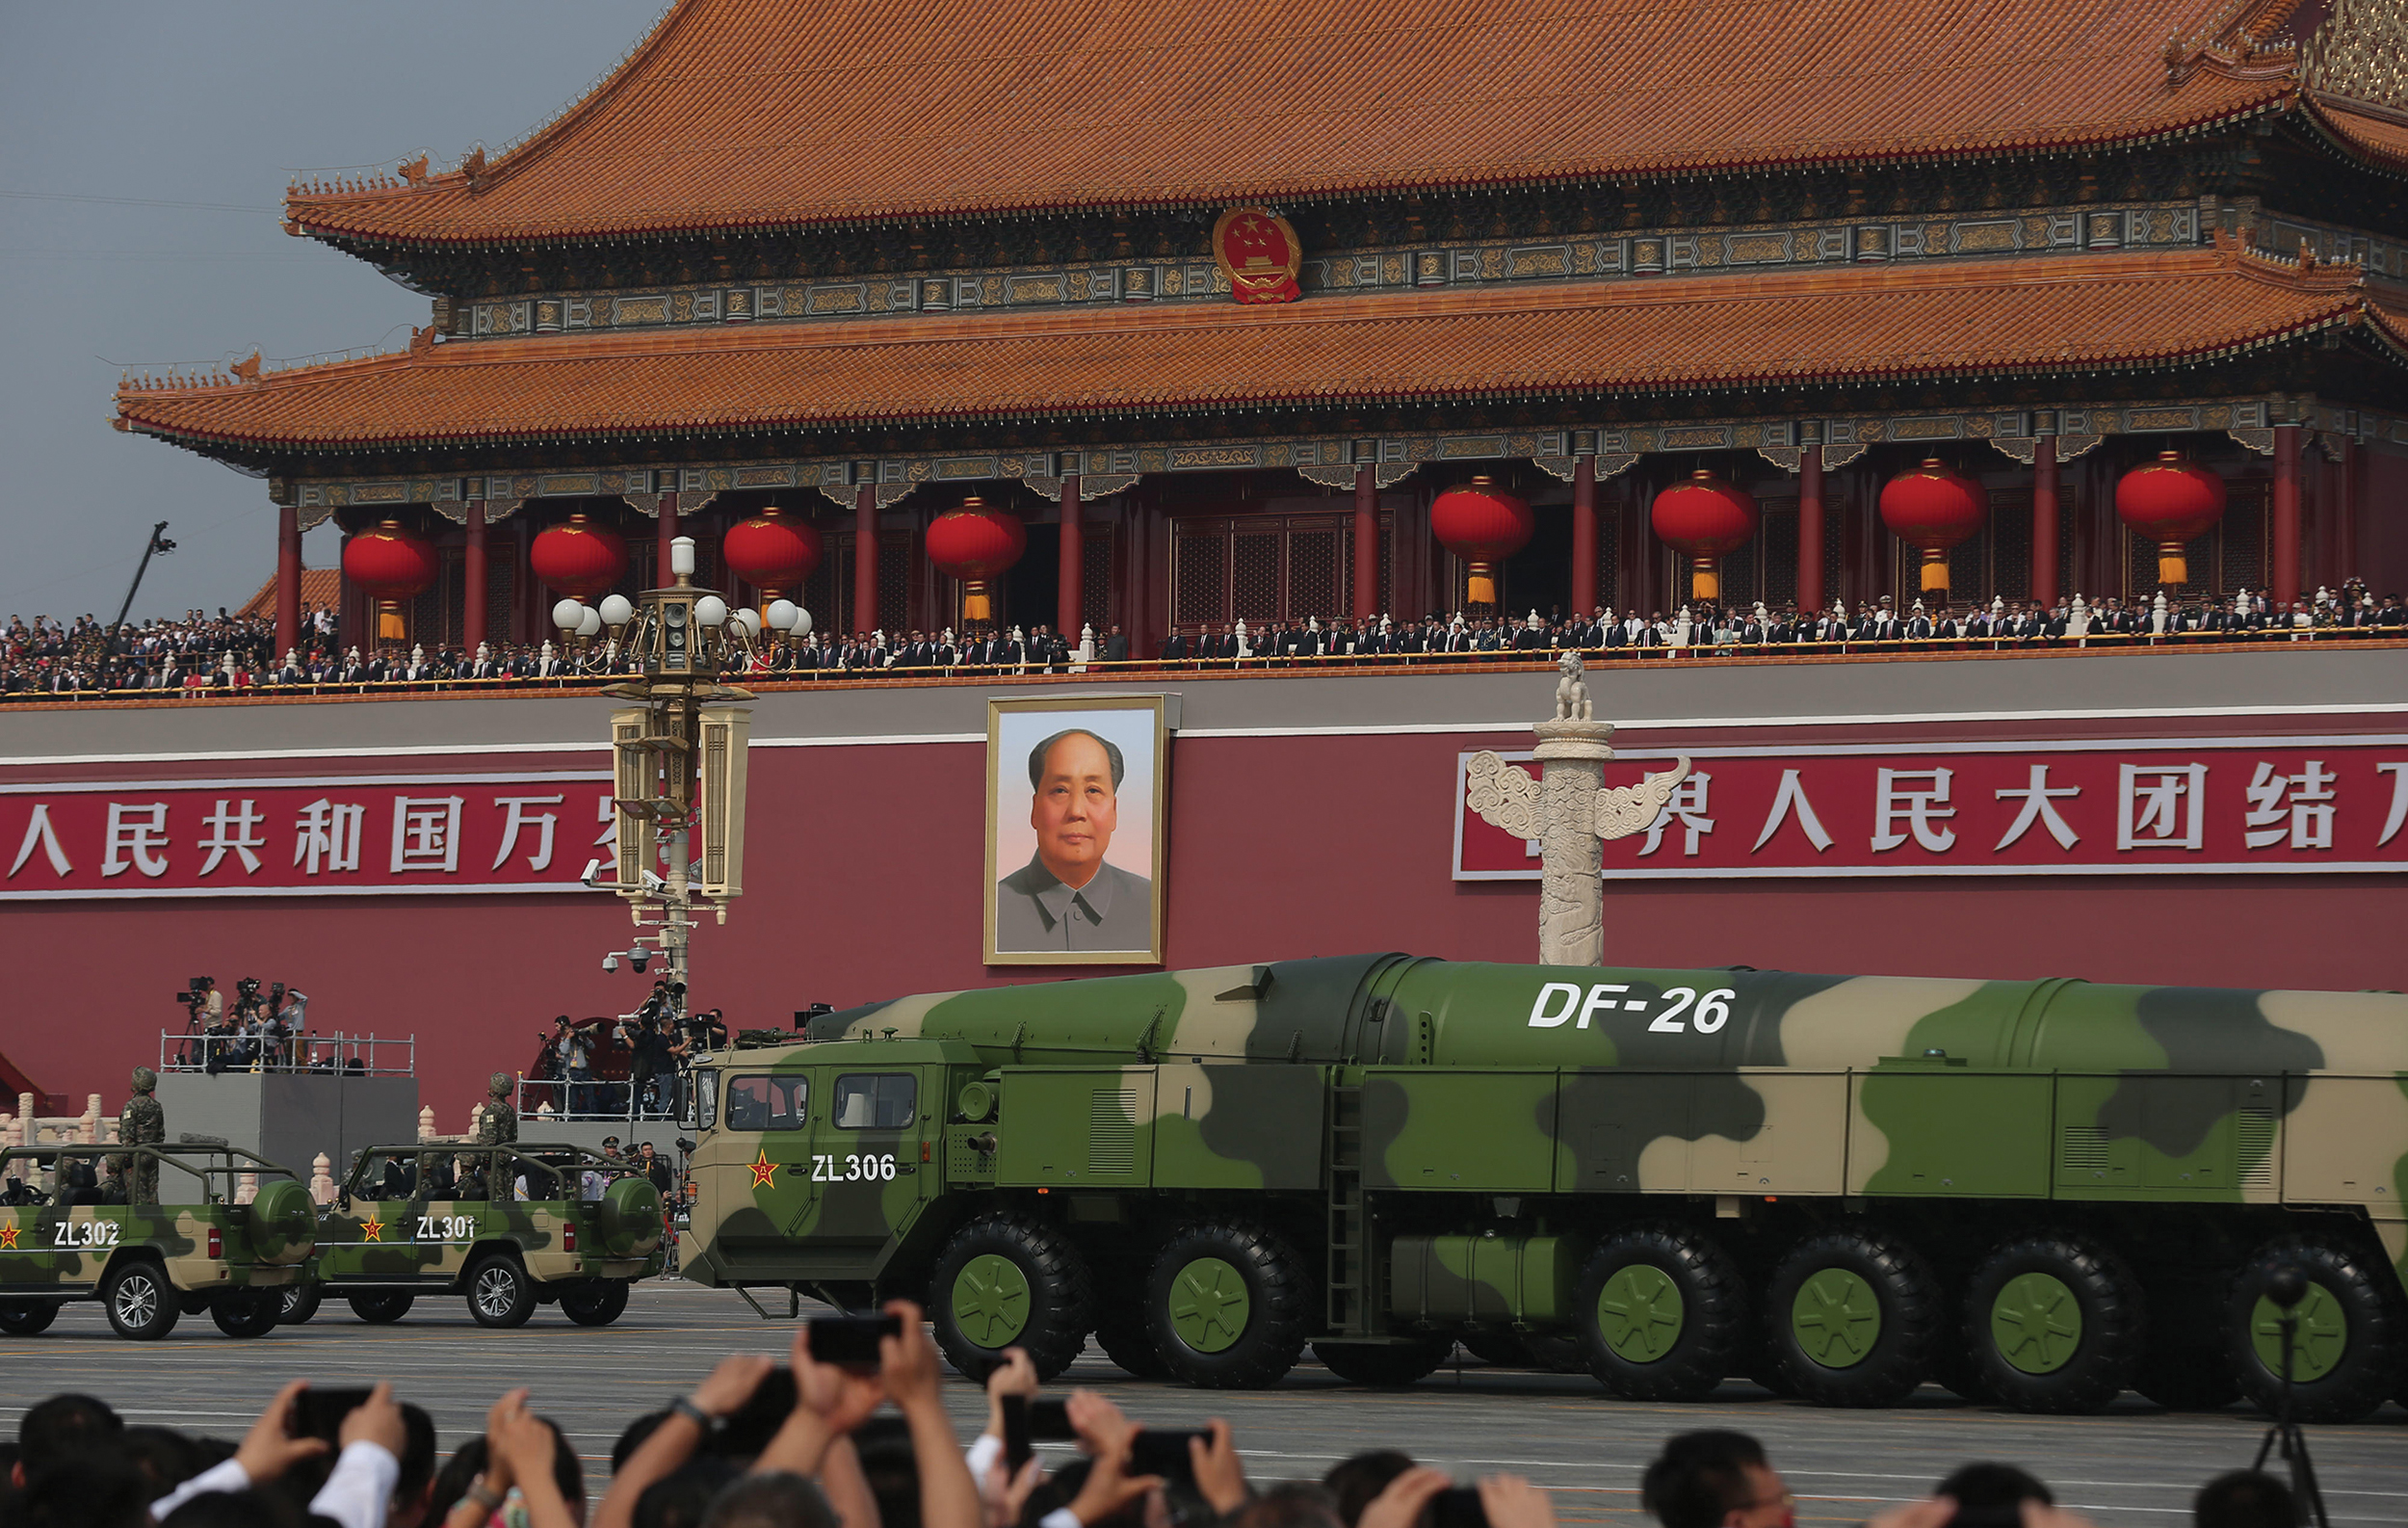 People’s Liberation Army Rocket Force displays its intermediate-range ballistic missile Dong Feng-26 during military parade in front of Tiananmen Gate during military parade to celebrate 70th anniversary of People’s Republic of China